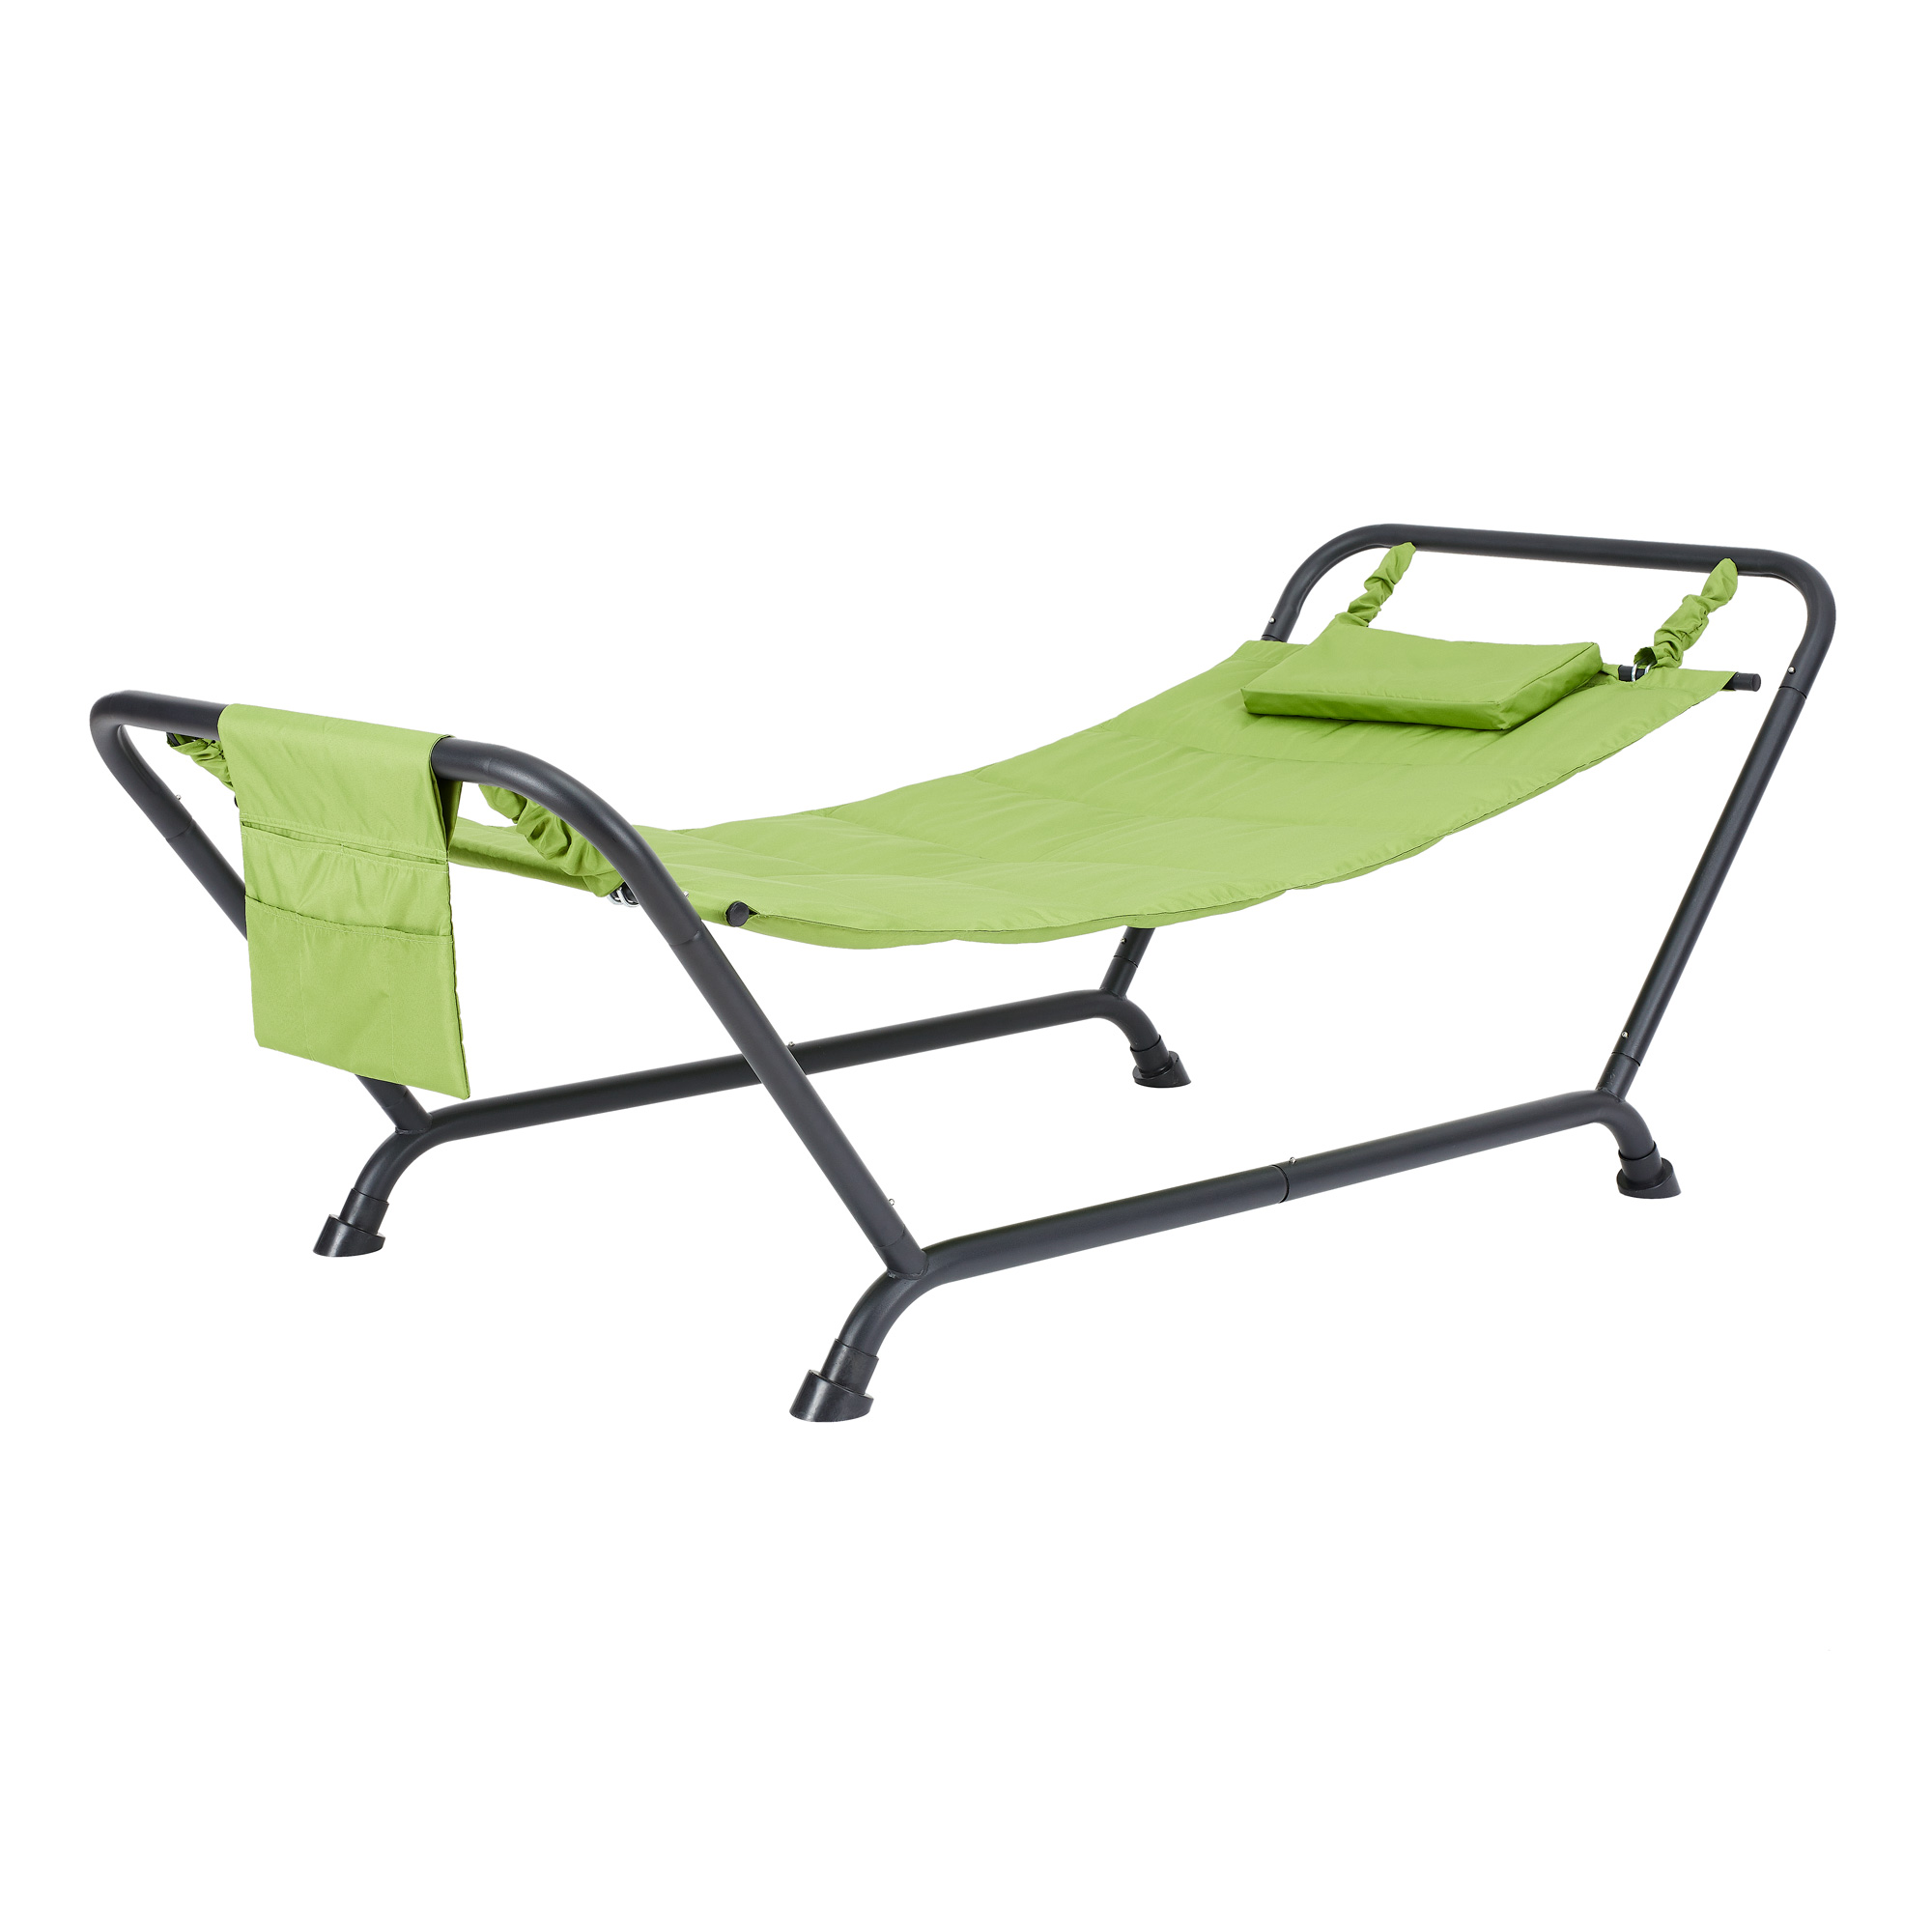 Mainstays Belden Park Hammock with Stand and Pillow, Outdoor, Material Polyester, Multi color, Assembled Length 90.55" - image 1 of 6